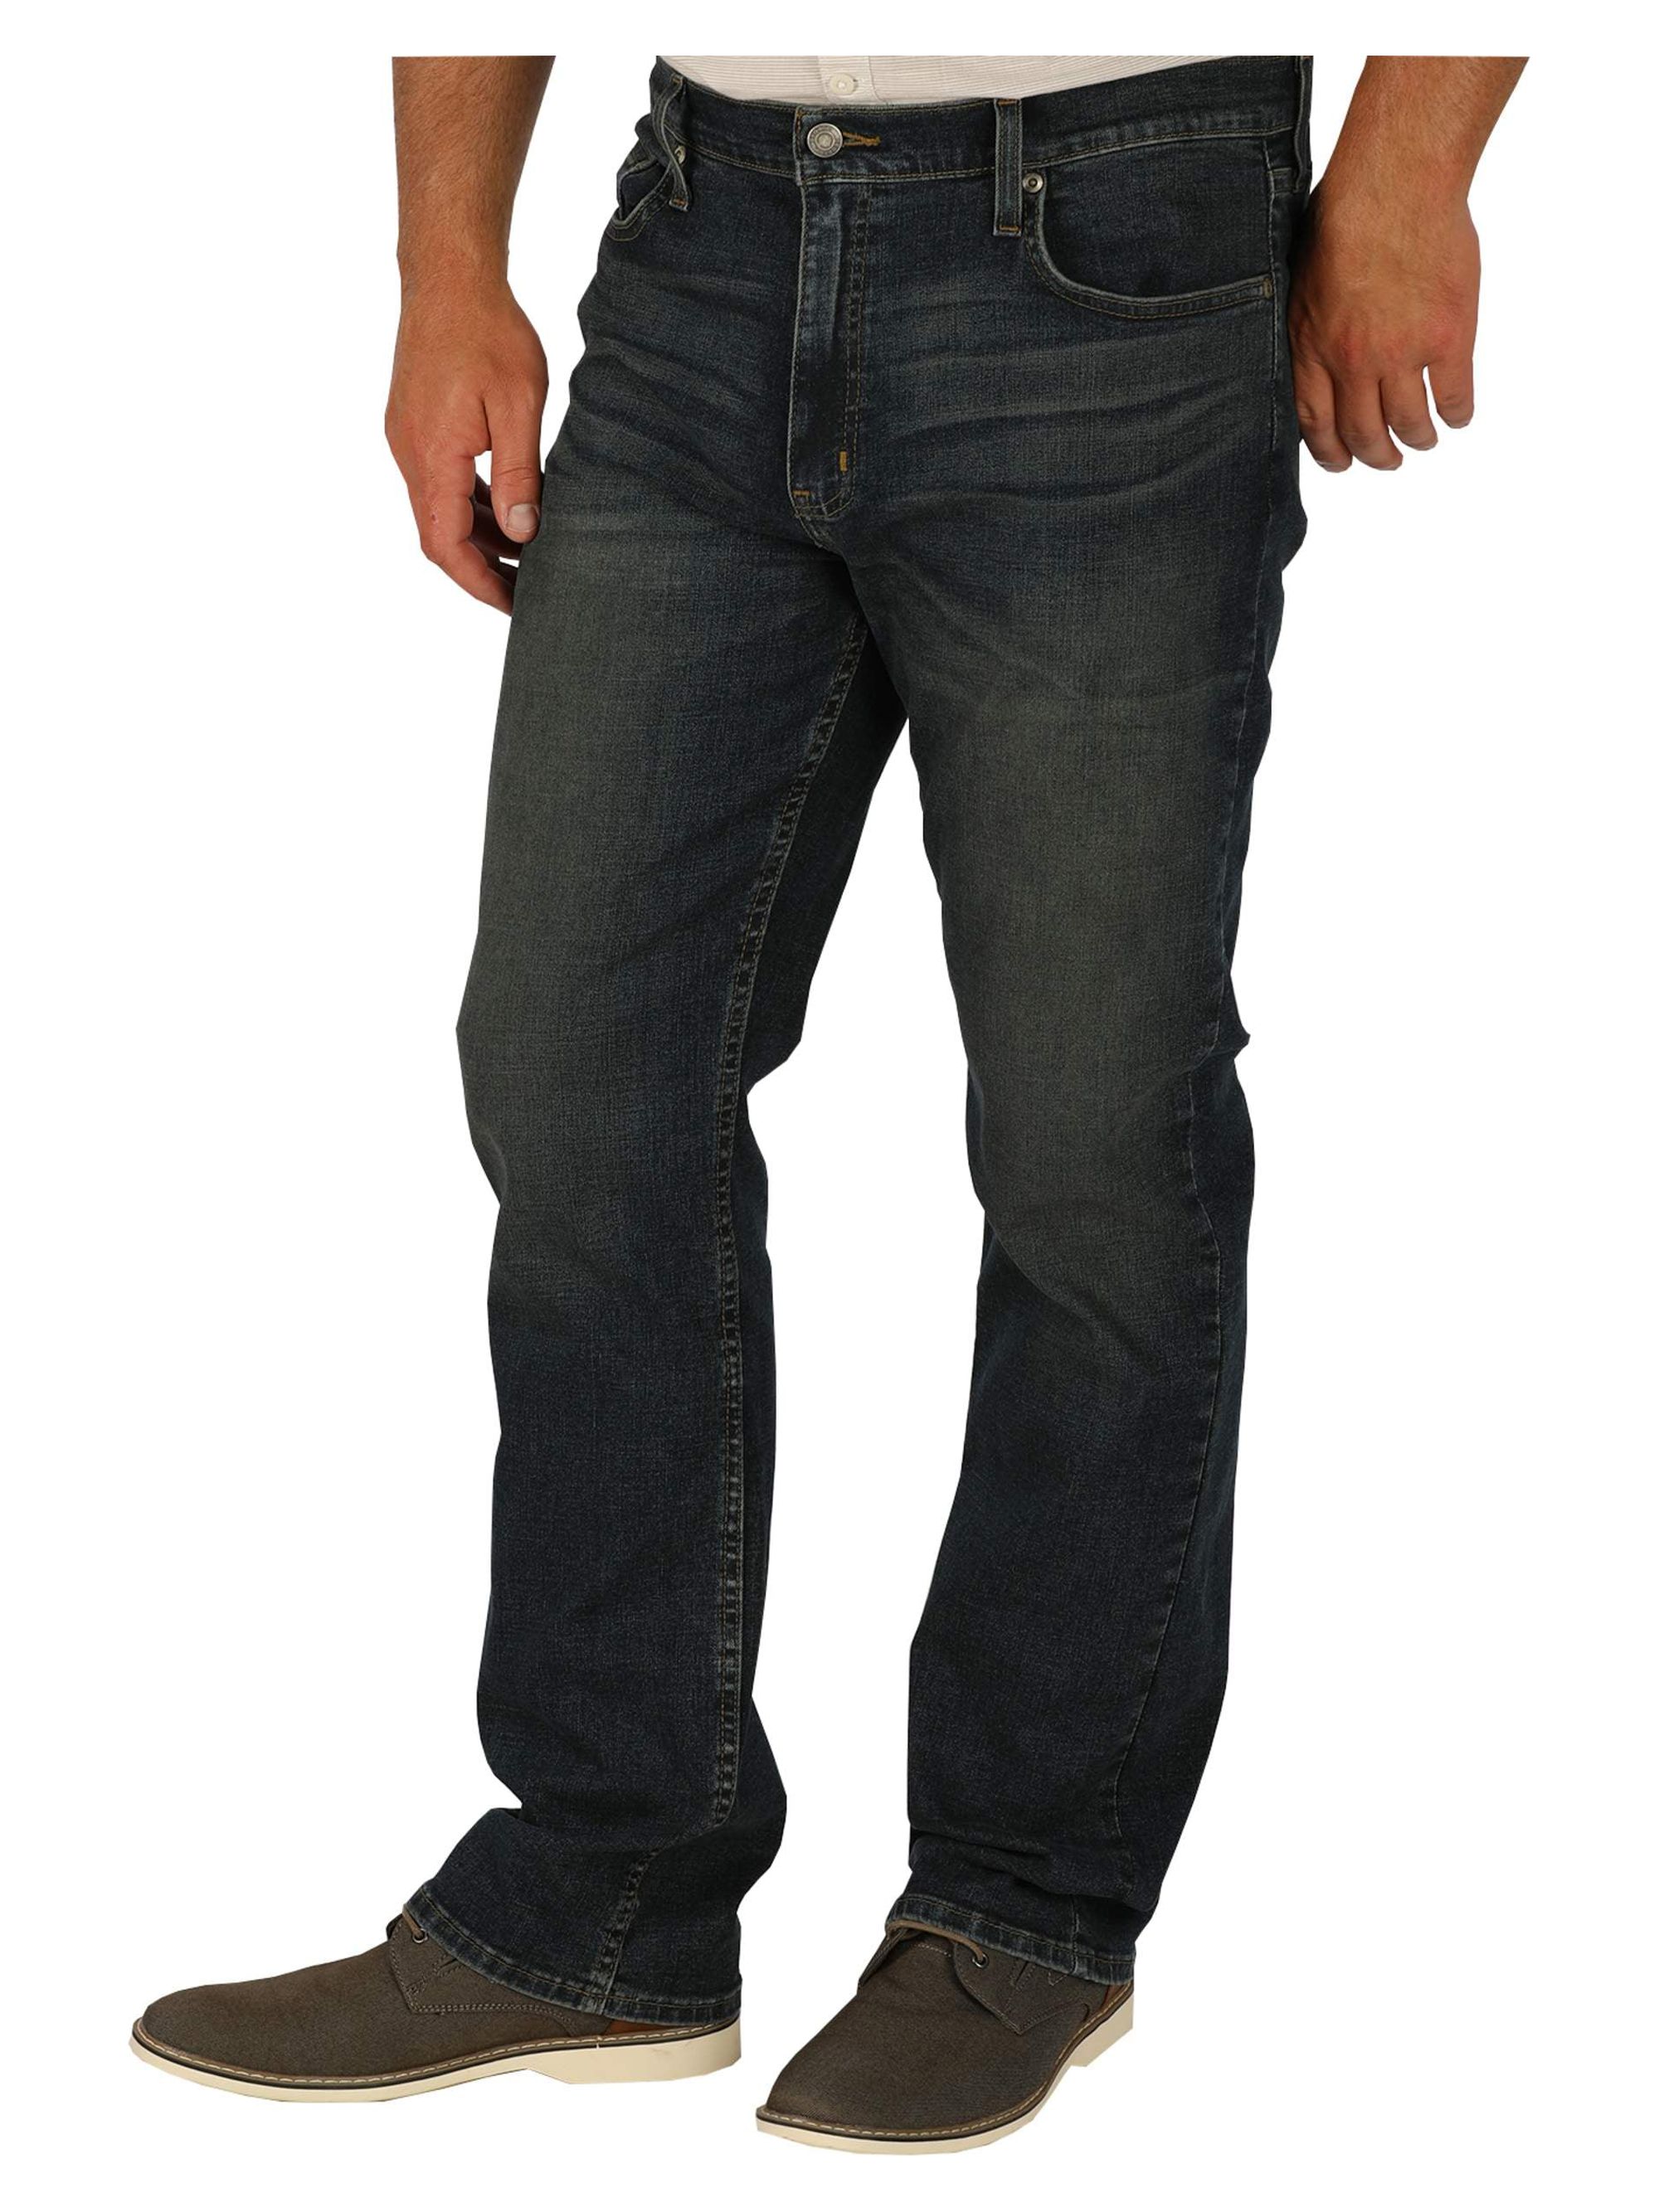 George Men's Bootcut Jeans - image 1 of 6